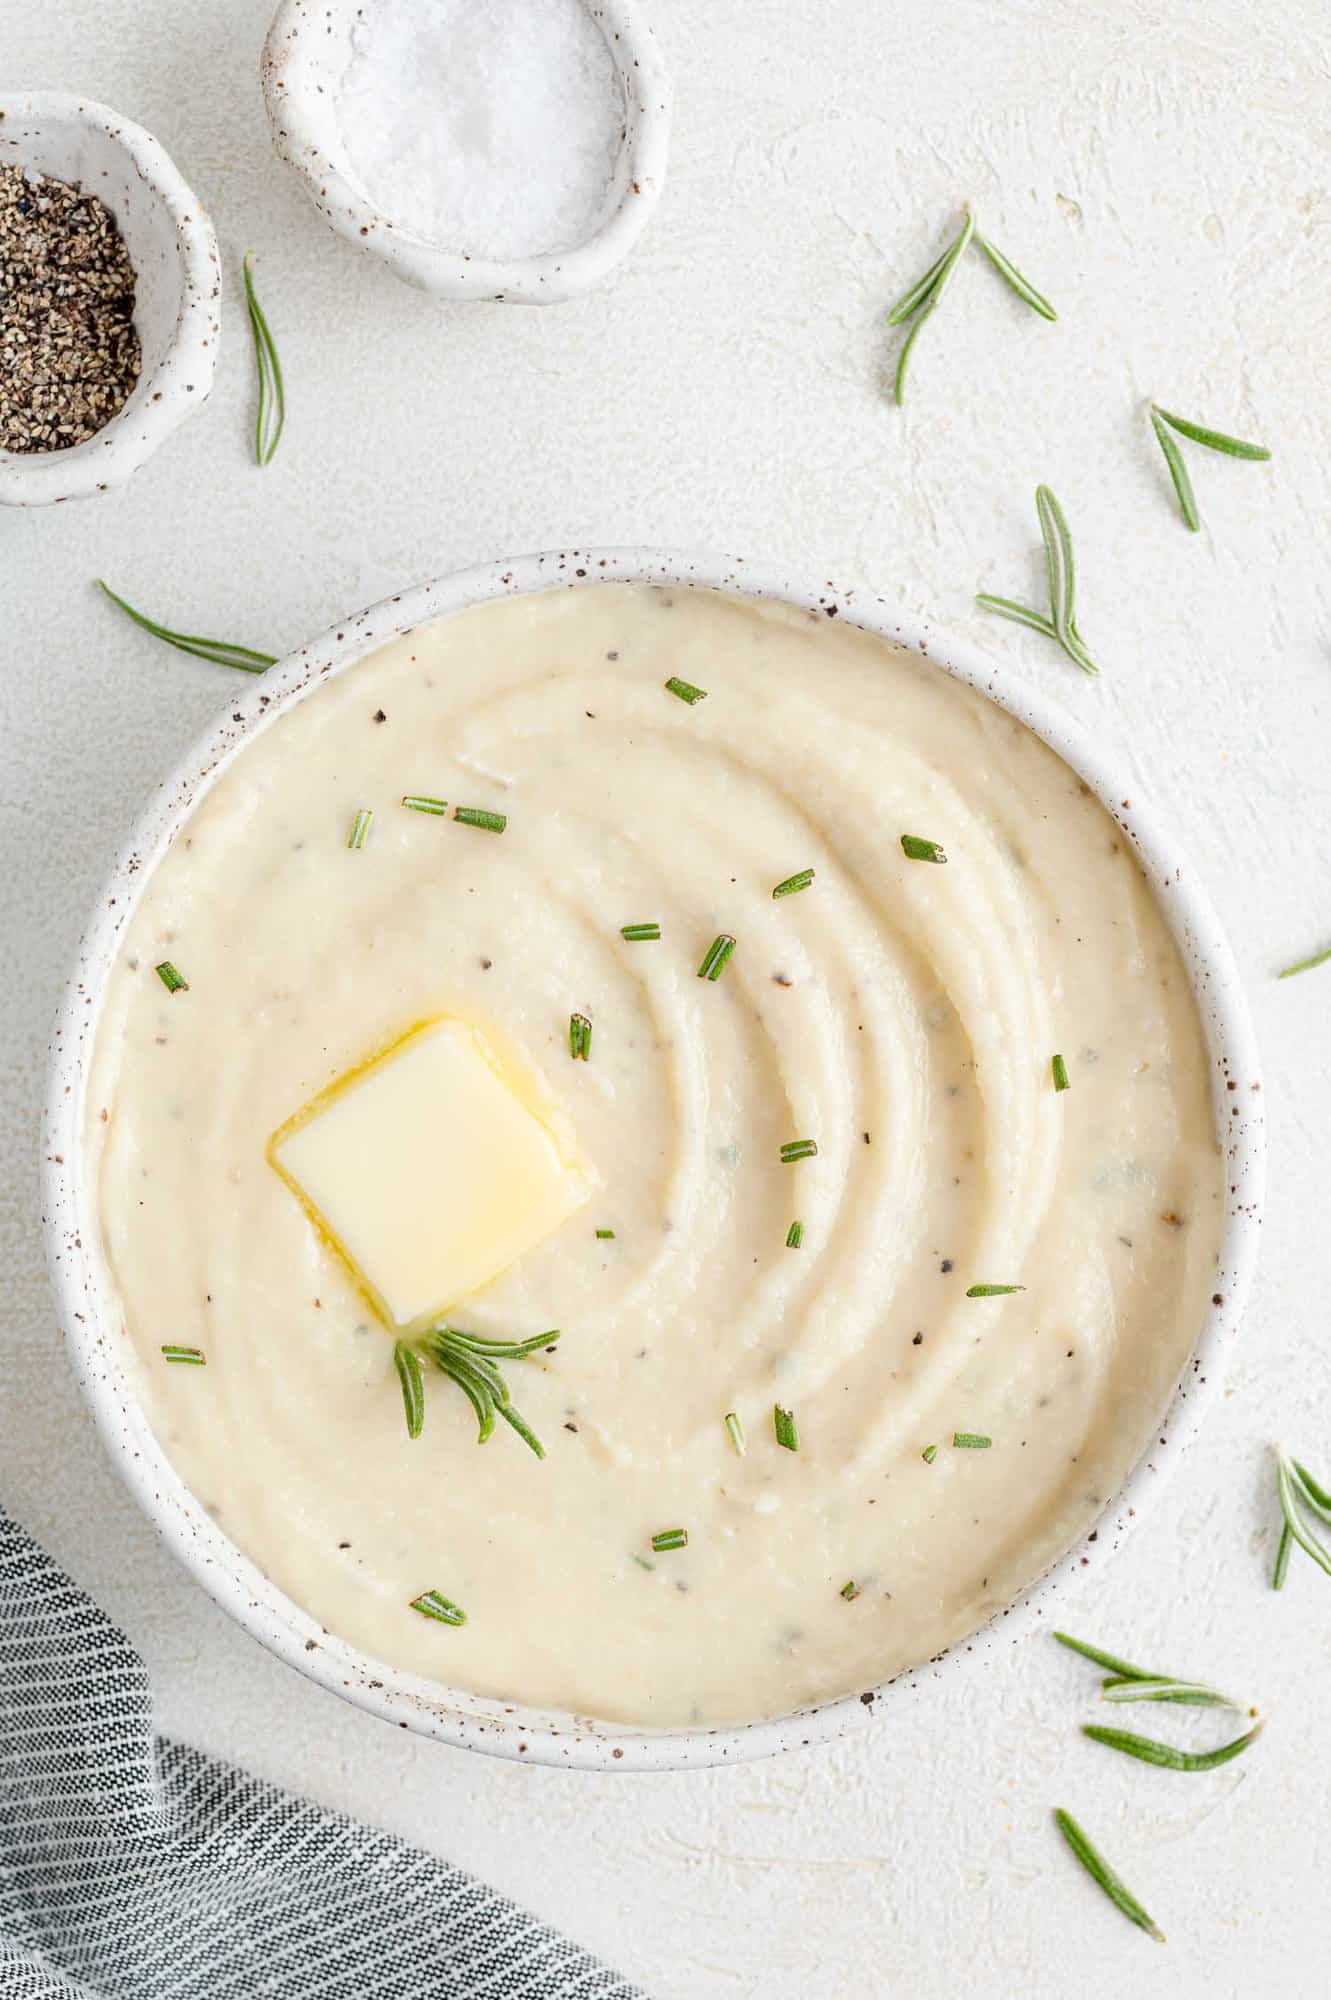 Creamy parsnip puree in a white bowl.